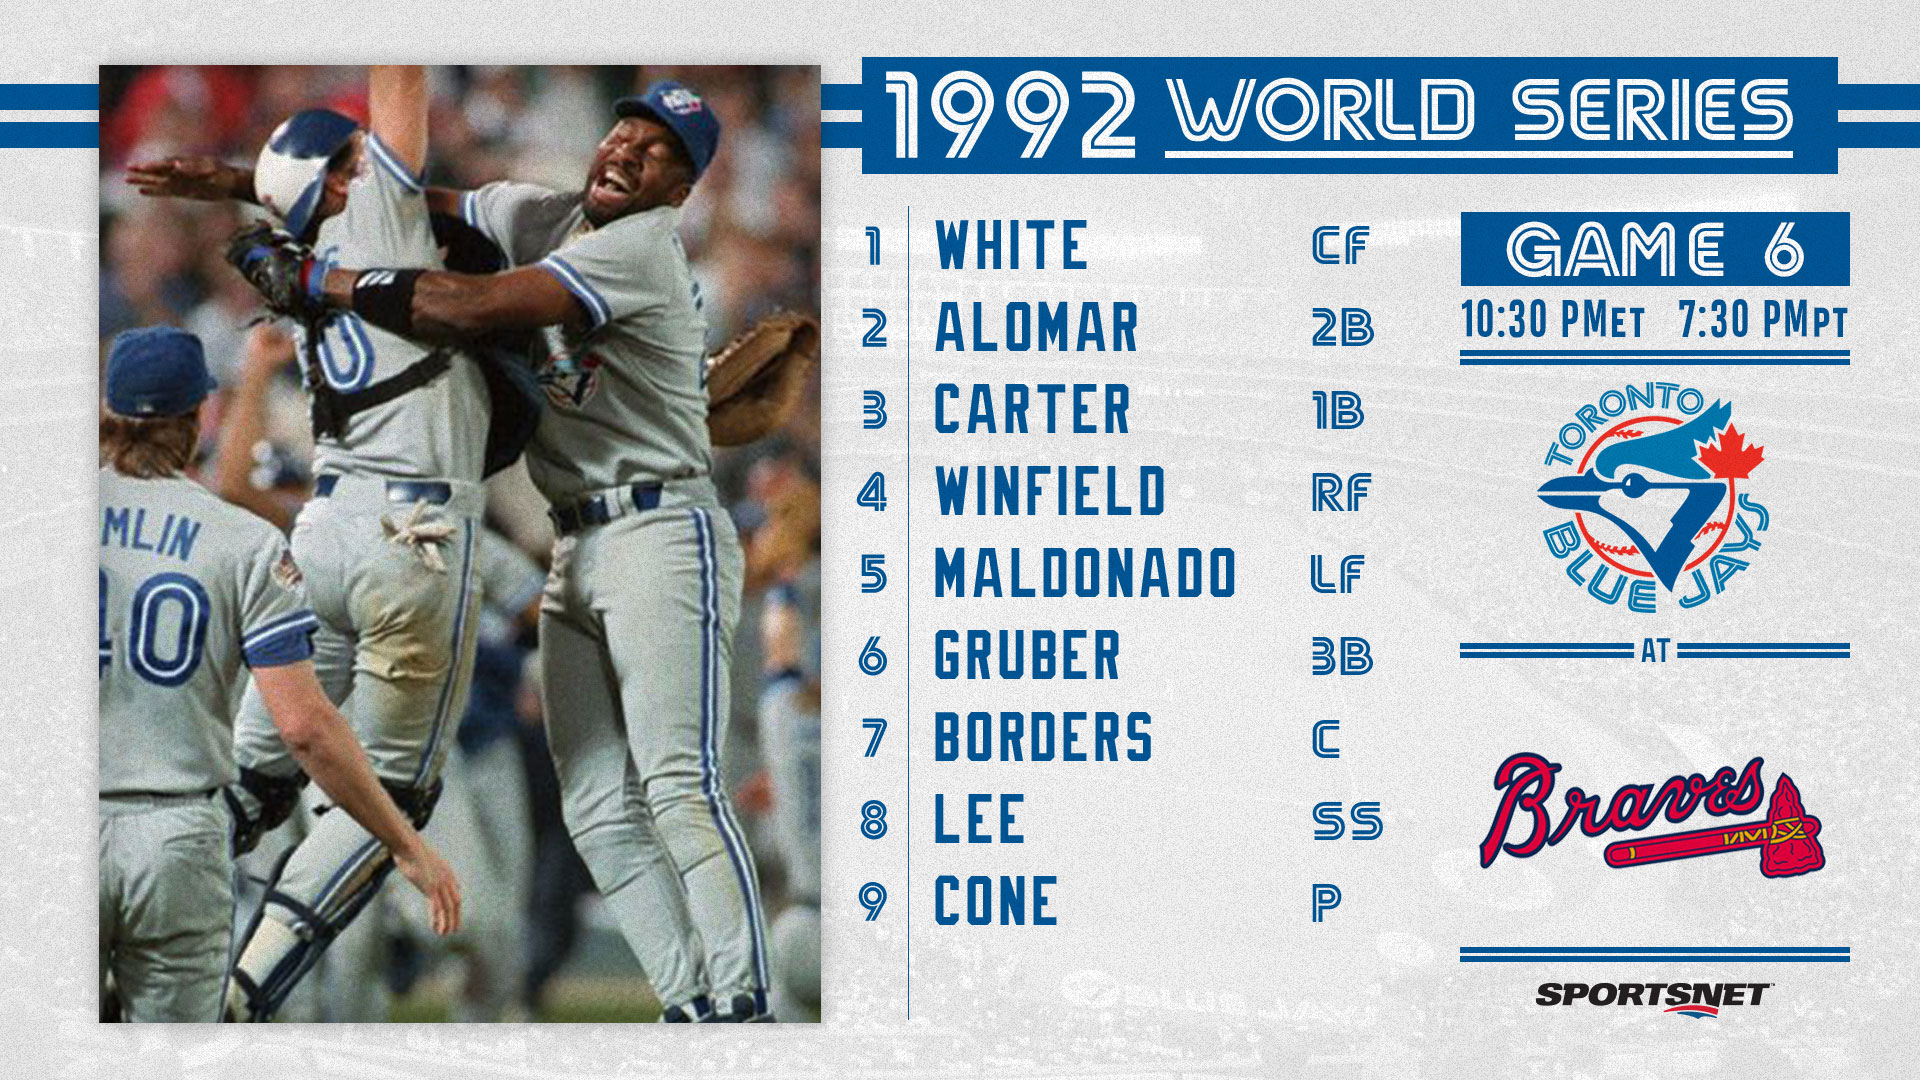 Toronto Blue Jays on X: The Toronto Blue Jays are baseball's best in 1992!  Relive the moment we won it all! Watch Game 6 of the '92 World Series  TONIGHT. #BlueJaysOnSN  /